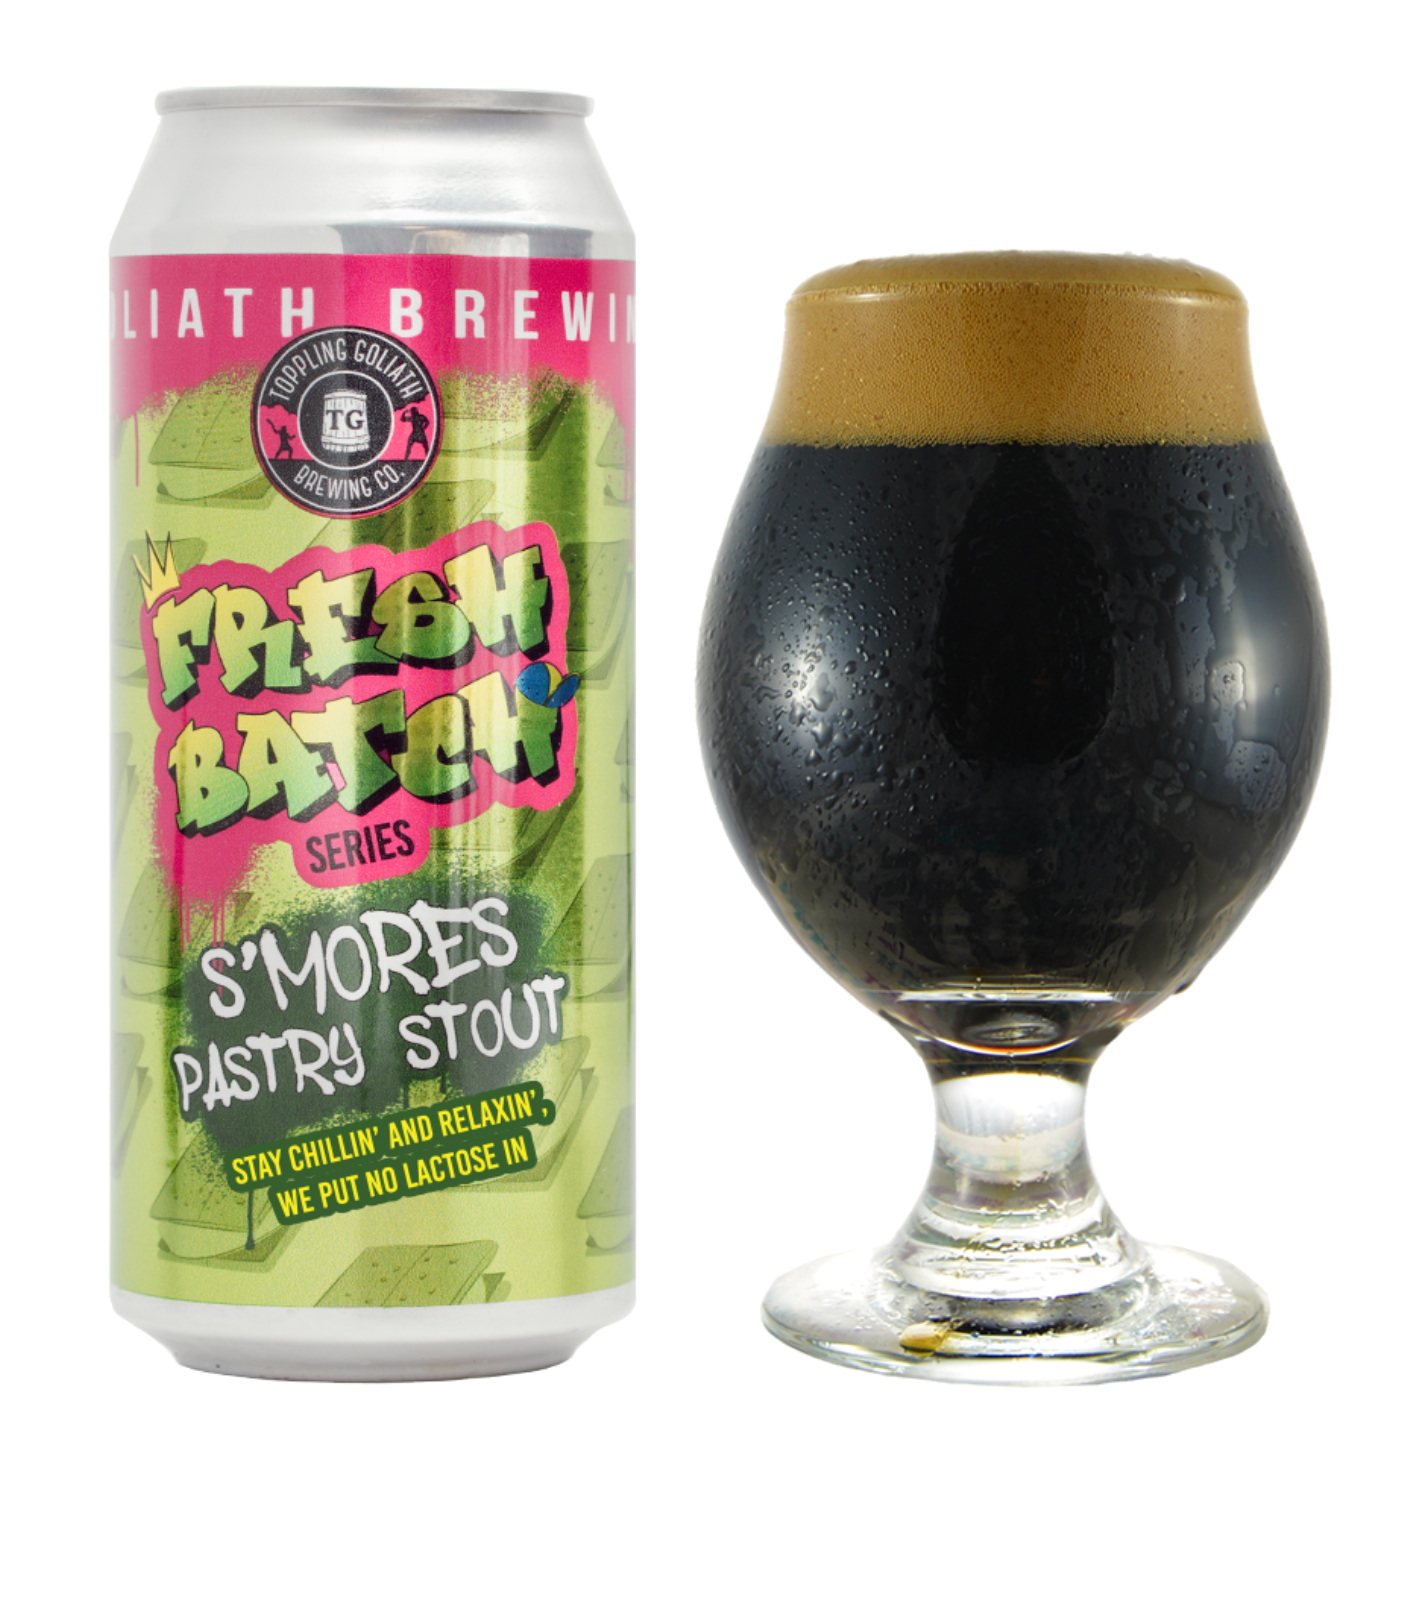 Buy Toppling Goliath Fresh Batch S'mores Pastry Stout Online -Craft City